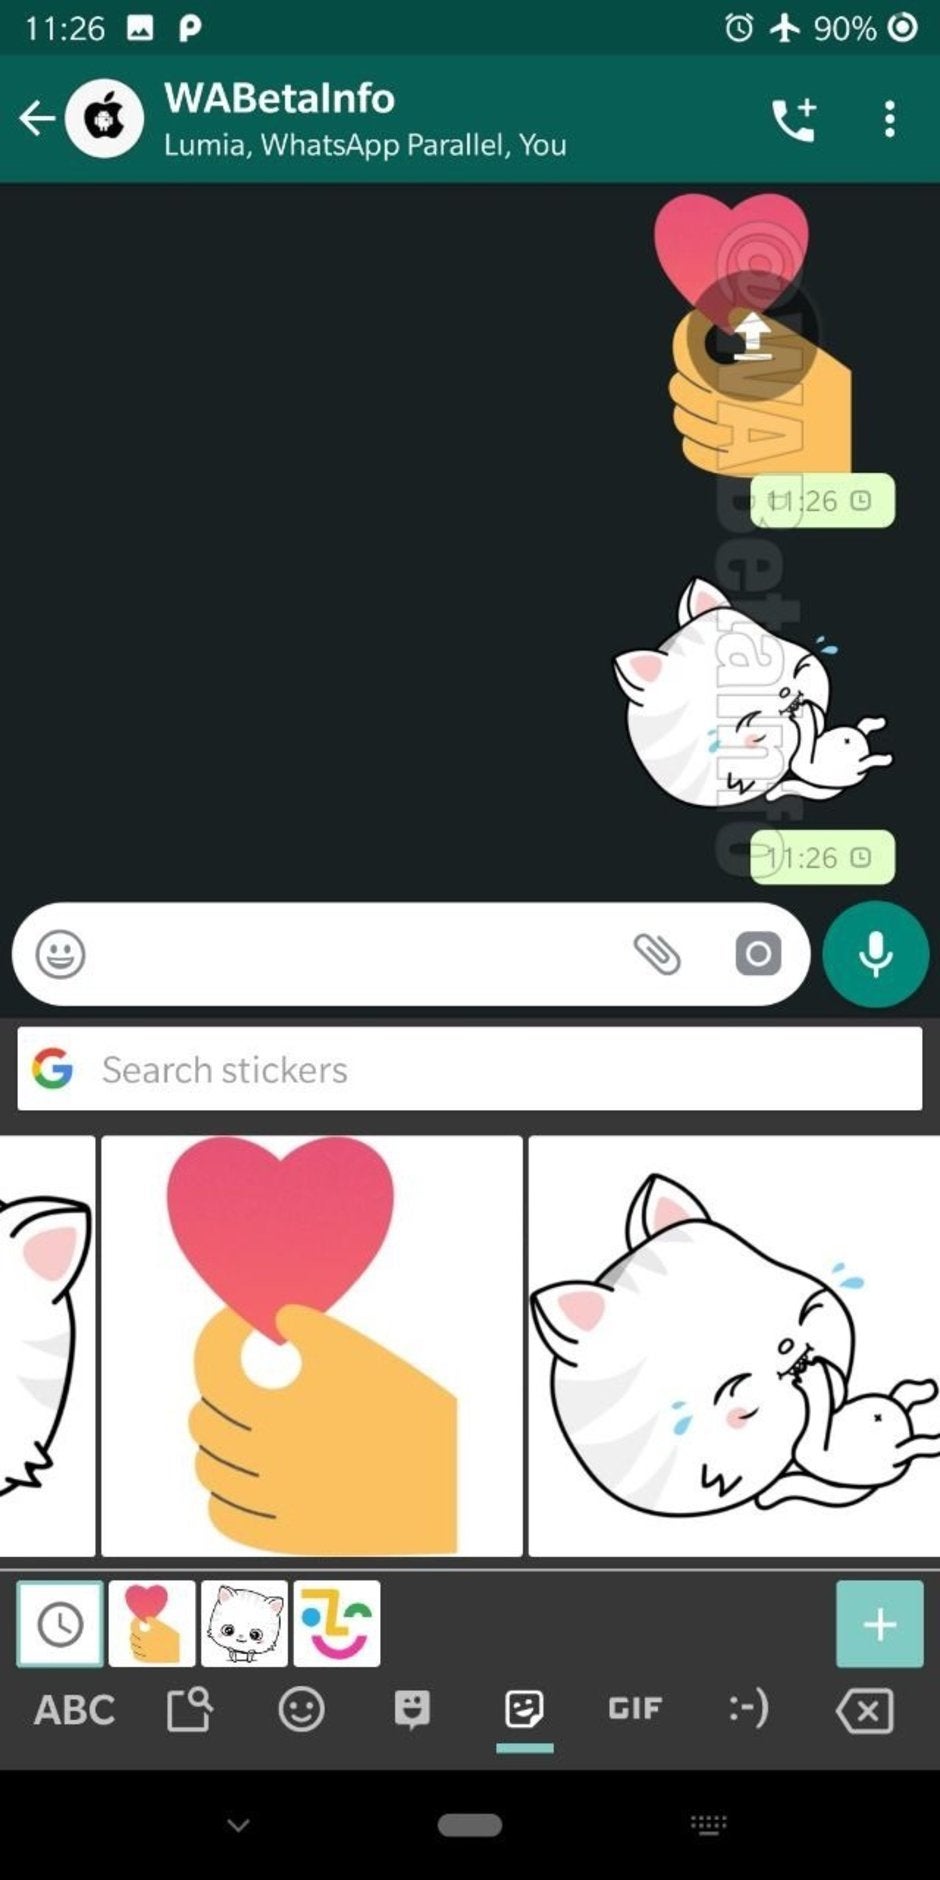 WhatsApp to bring stickers integration to Gboard keyboard app for Android